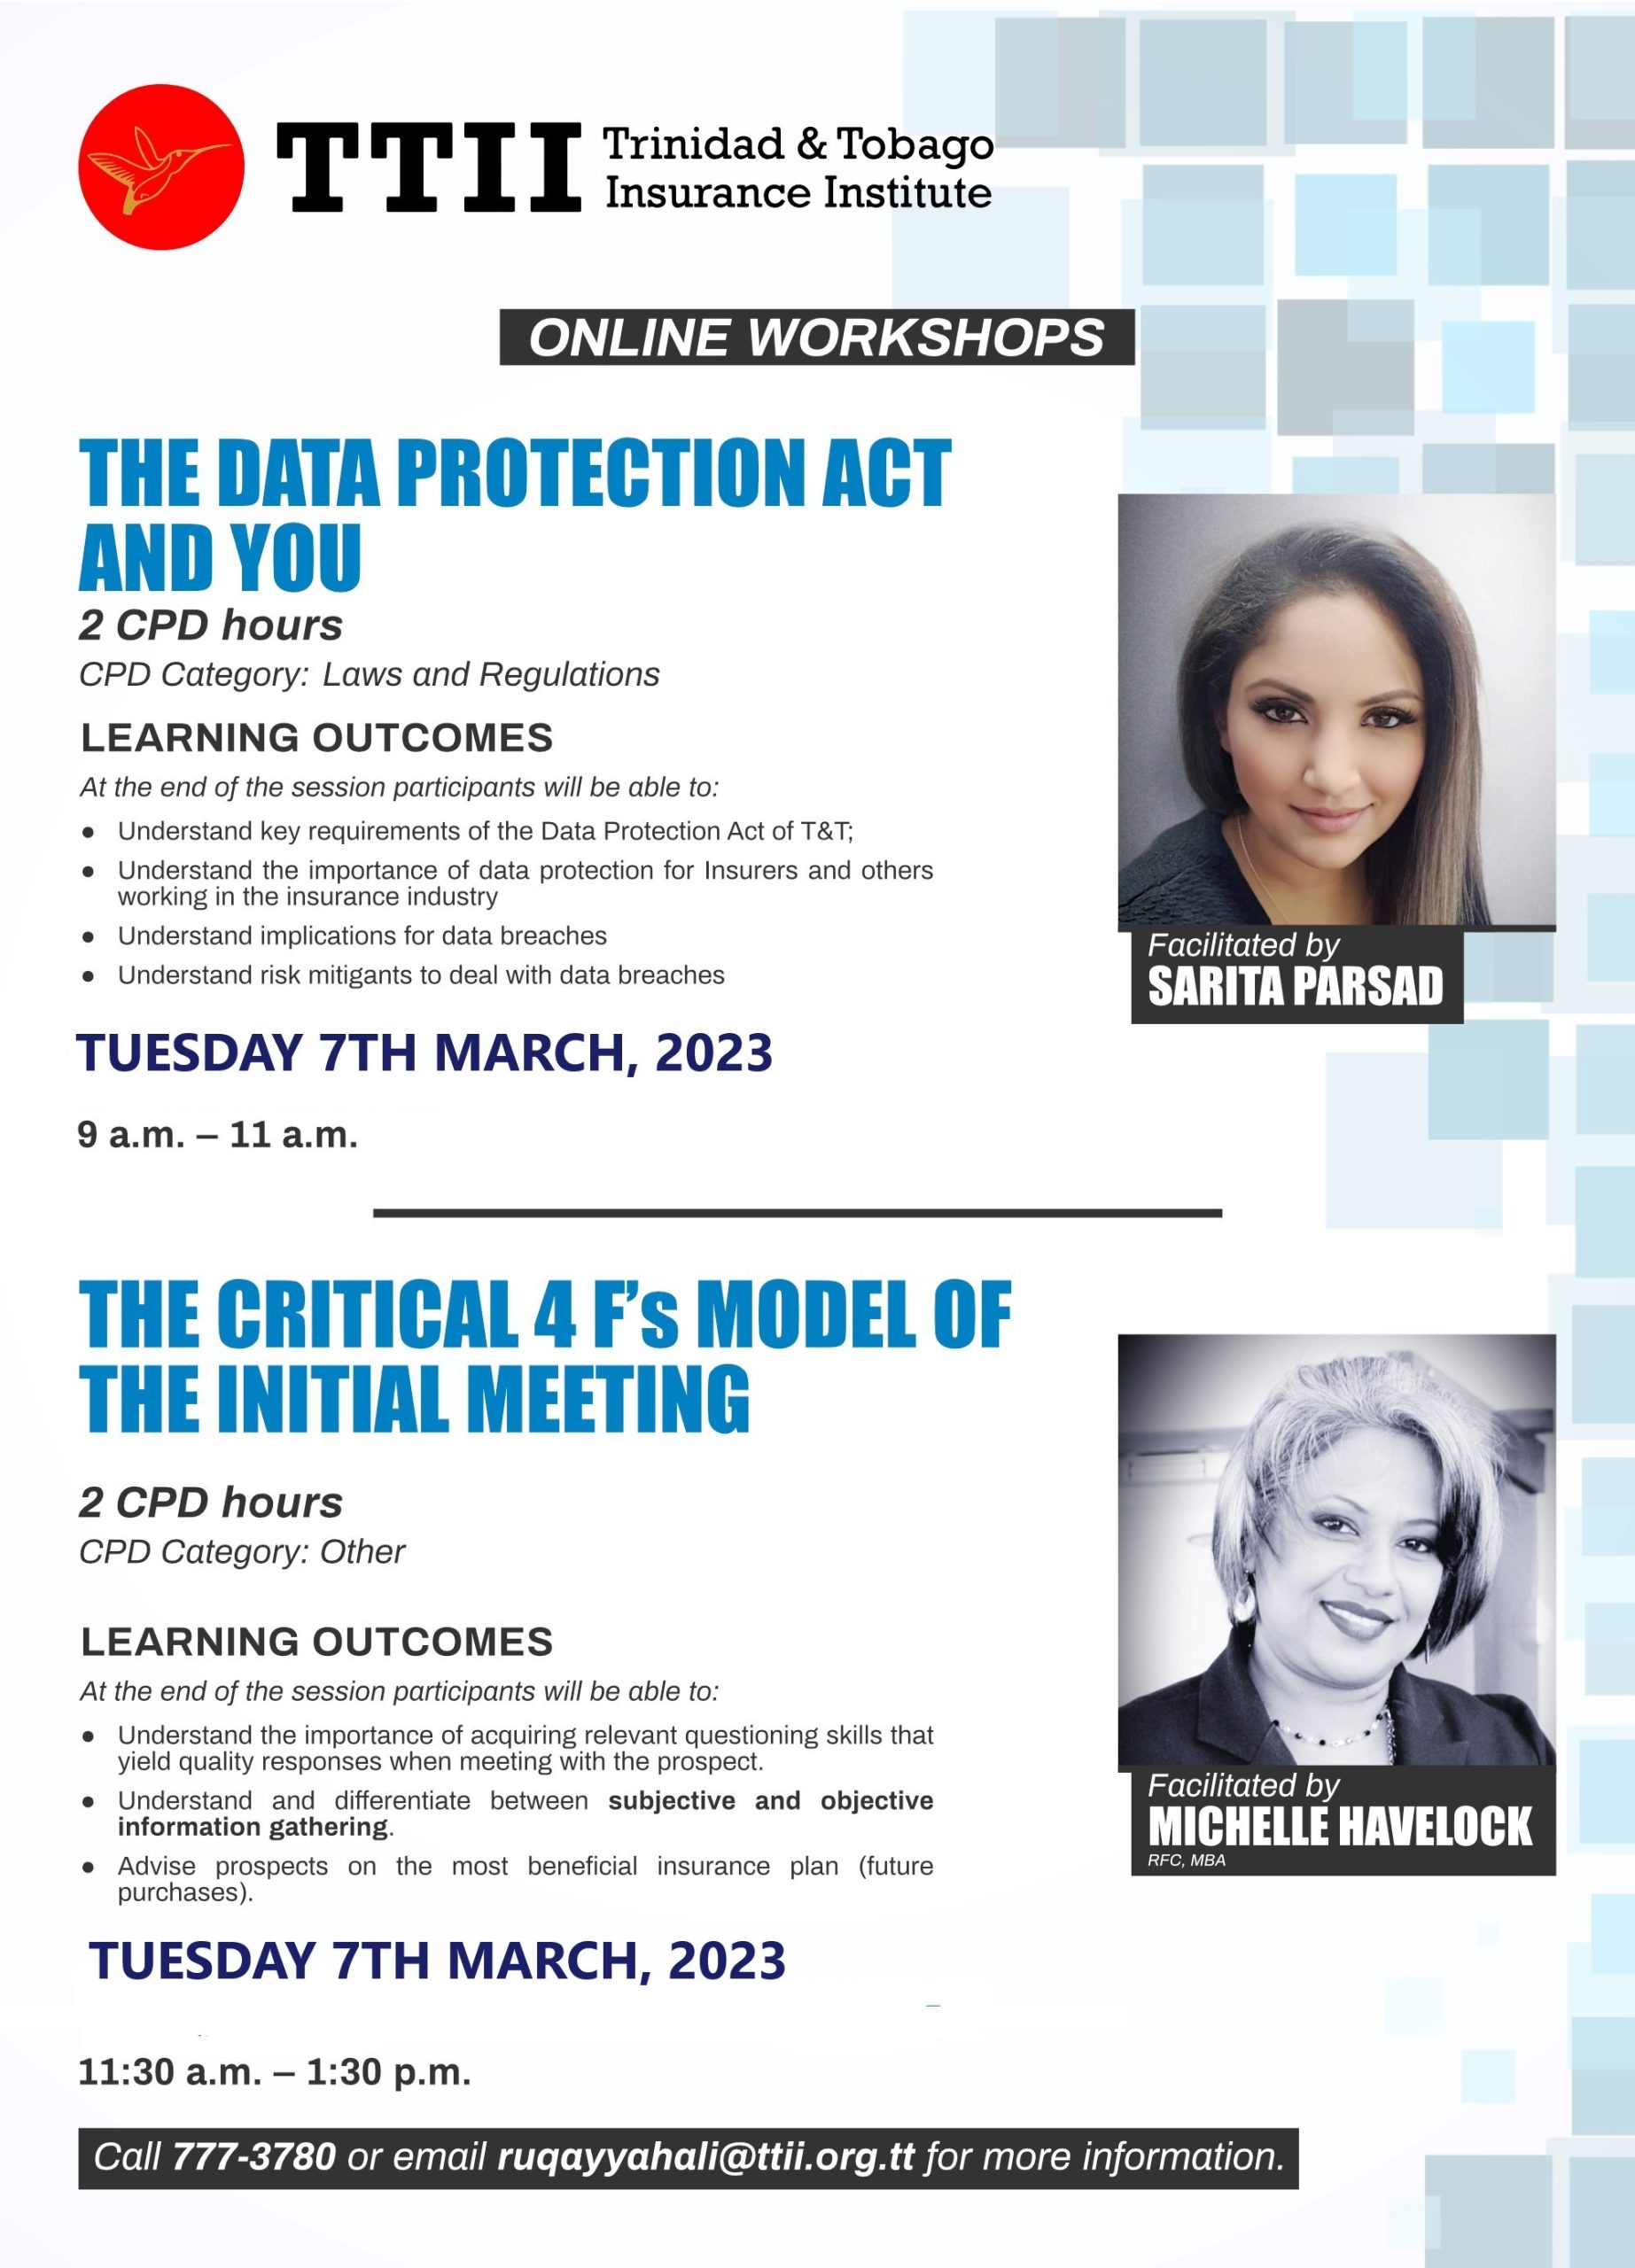 The Data Protection Act and You/Critical 4 F's Model of the Initial Meeting